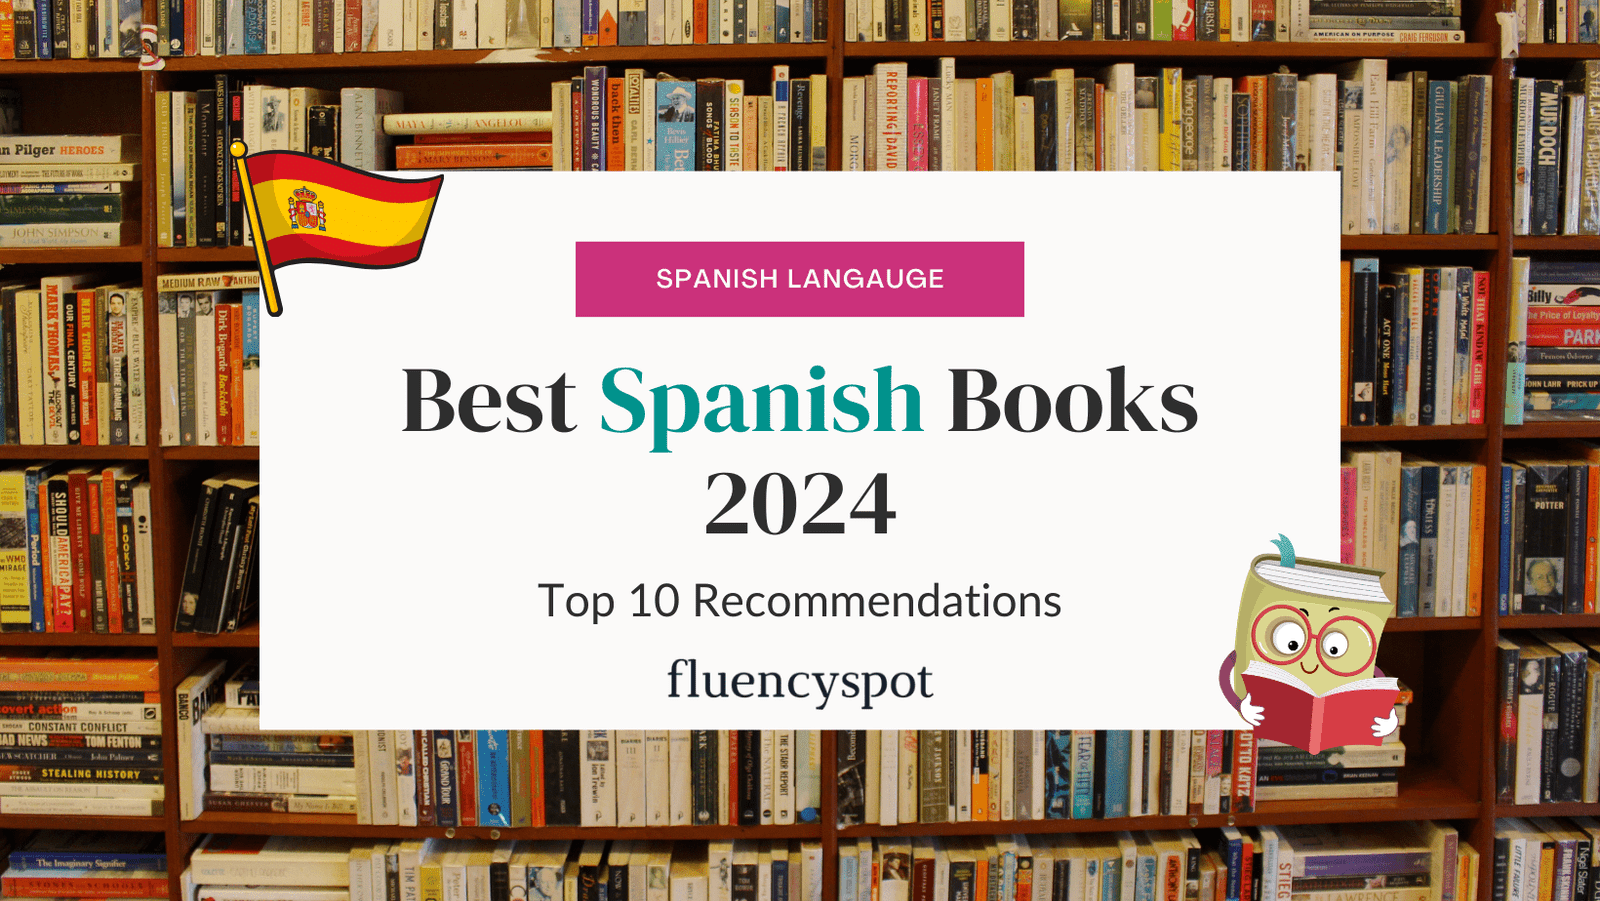 The Best Spanish Learning Books Top 10 Recommendations for 2024